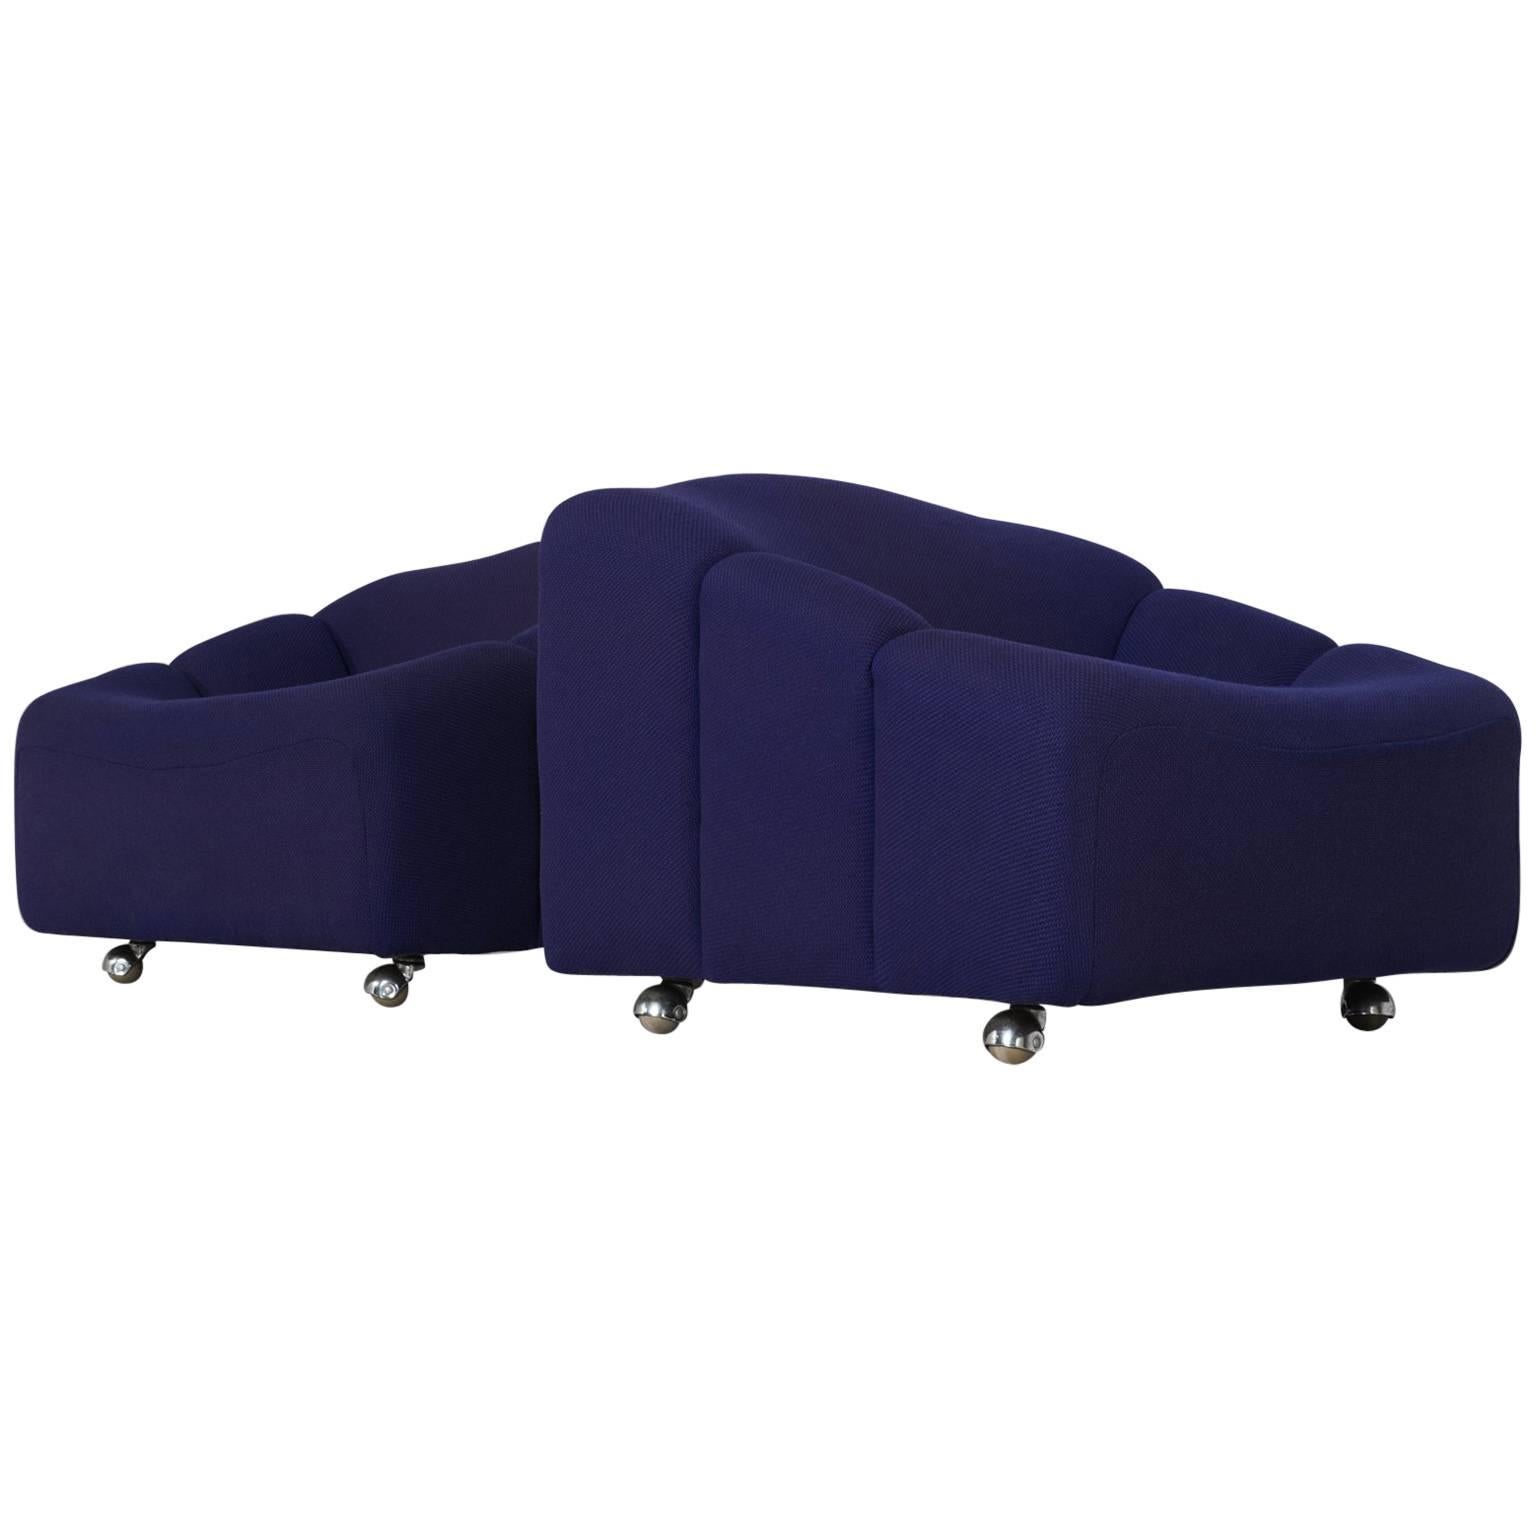 Pierre Paulin Two Lounge Chairs in Purple from the ABCD Series for Artifort